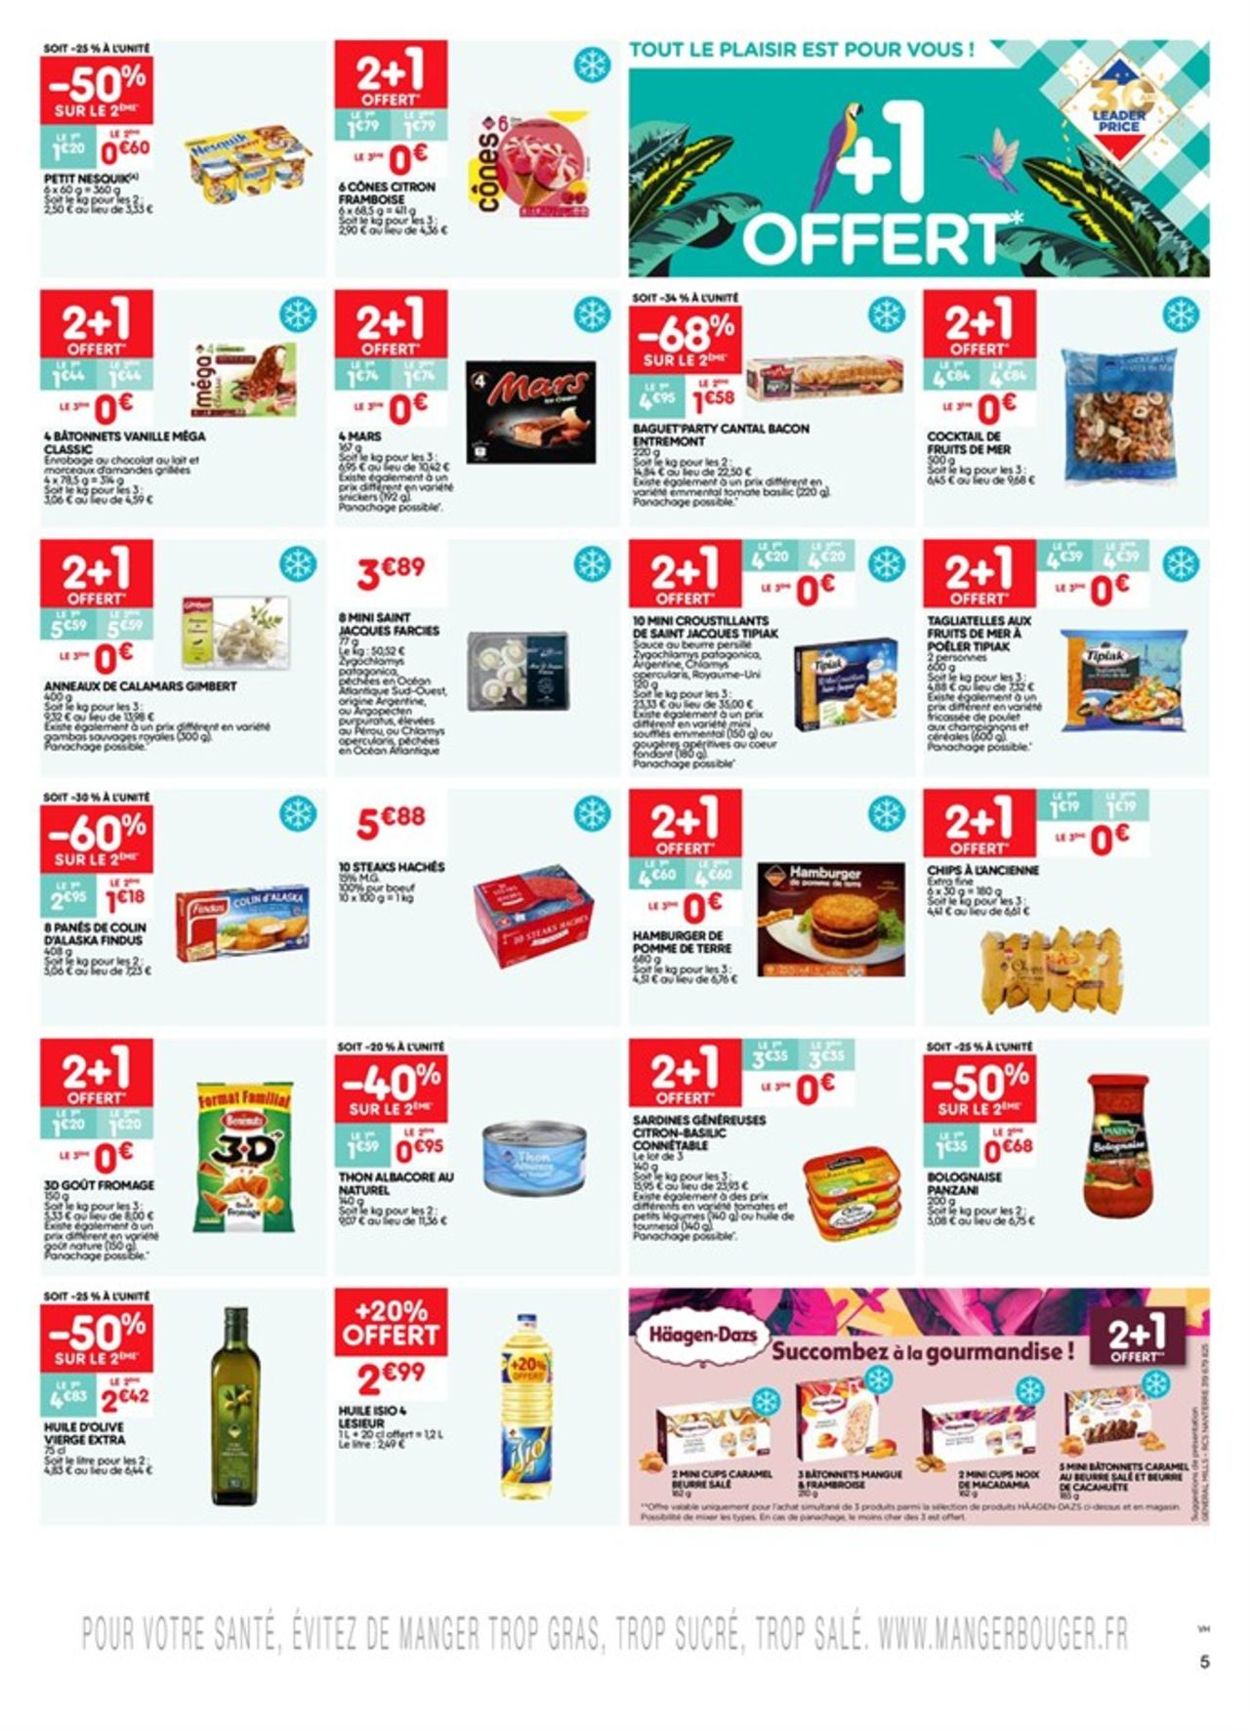 Leader Price Catalogue - 09.07-14.07.2019 (Page 5)